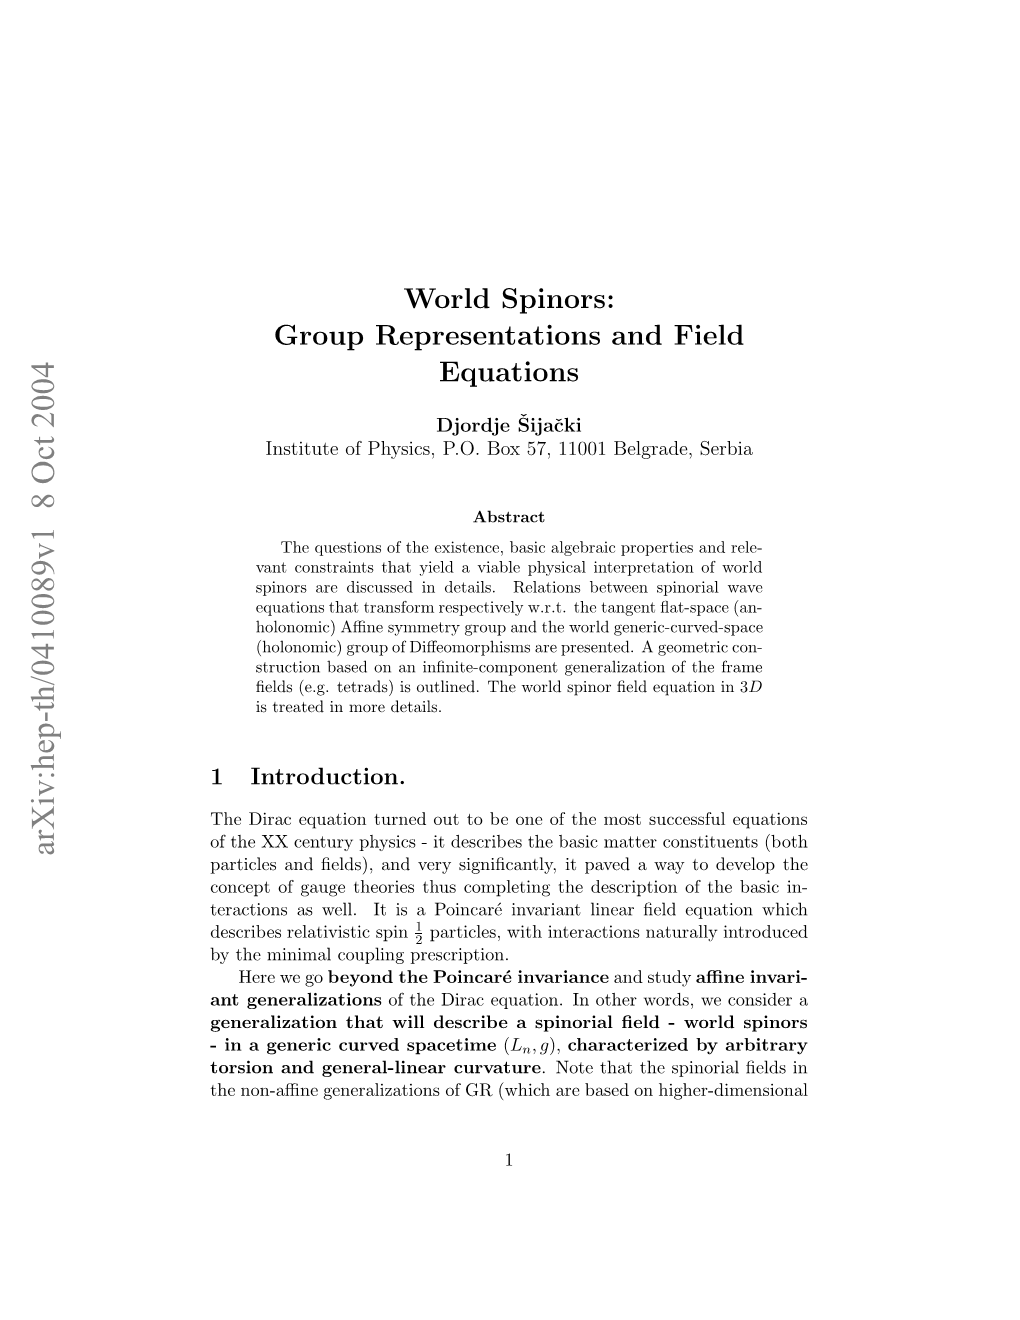 World Spinors: Group Representations and Field Equations